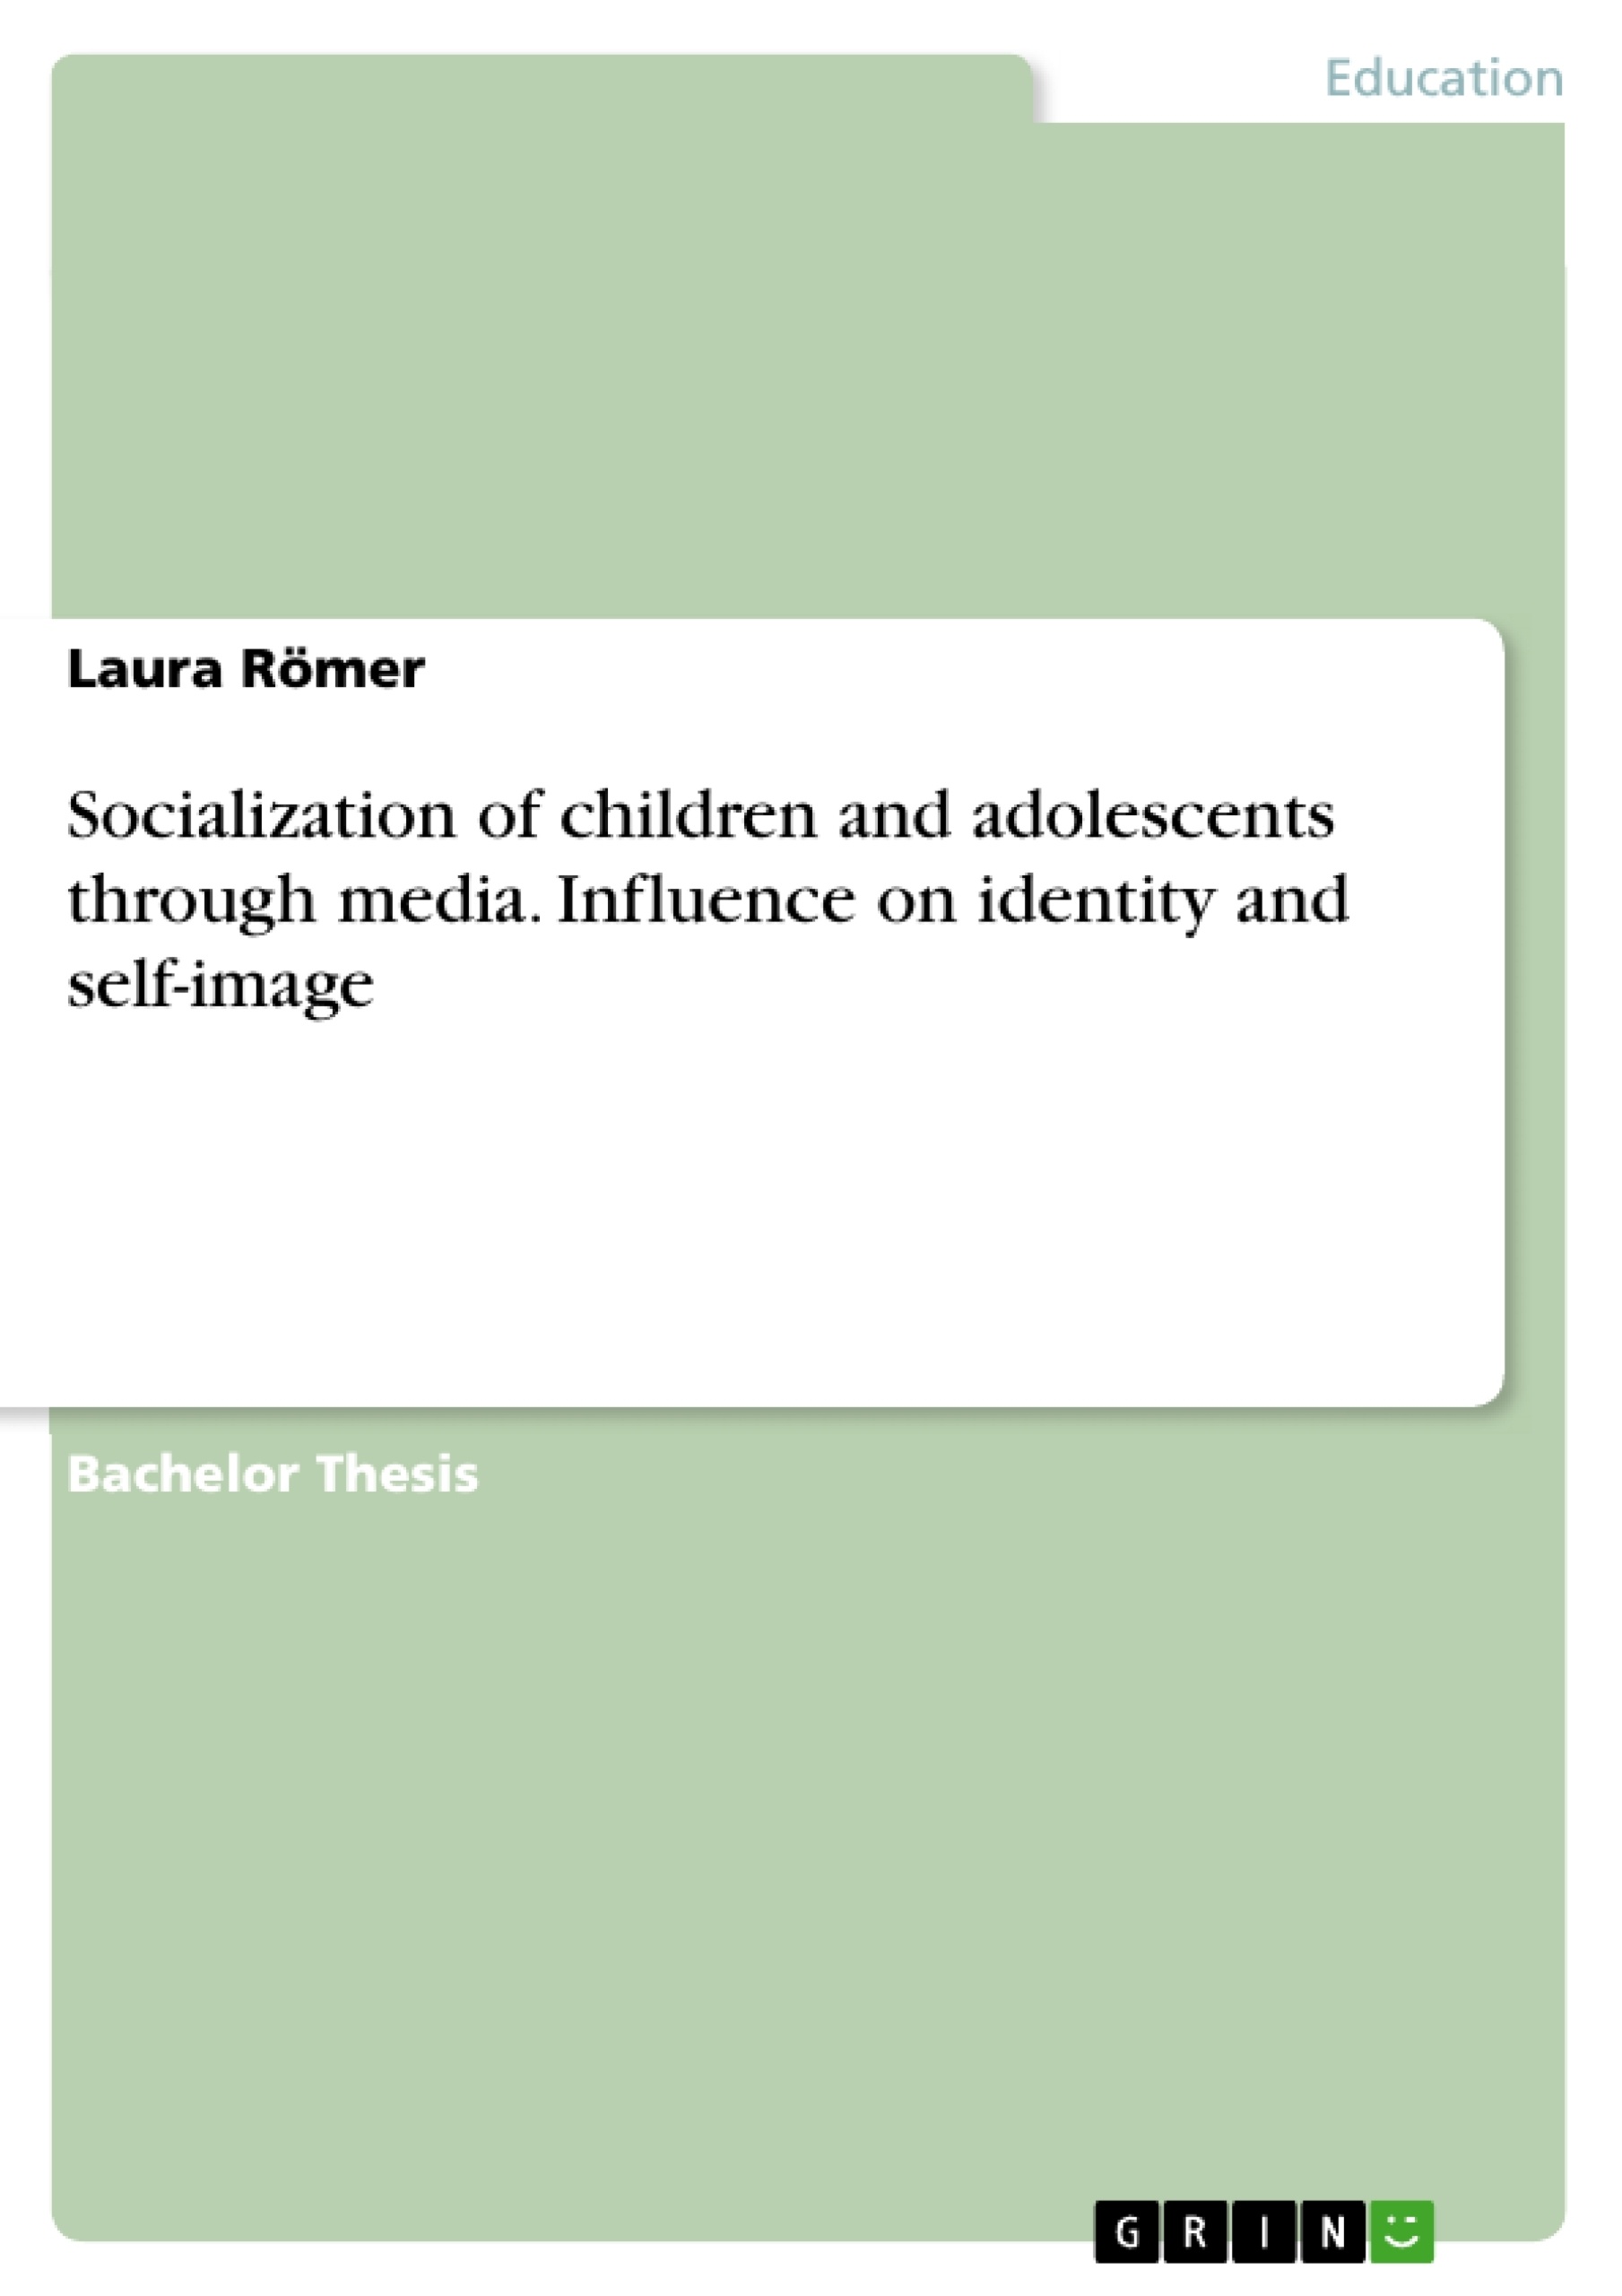 Title: Socialization of children and adolescents through media. Influence on identity and self-image